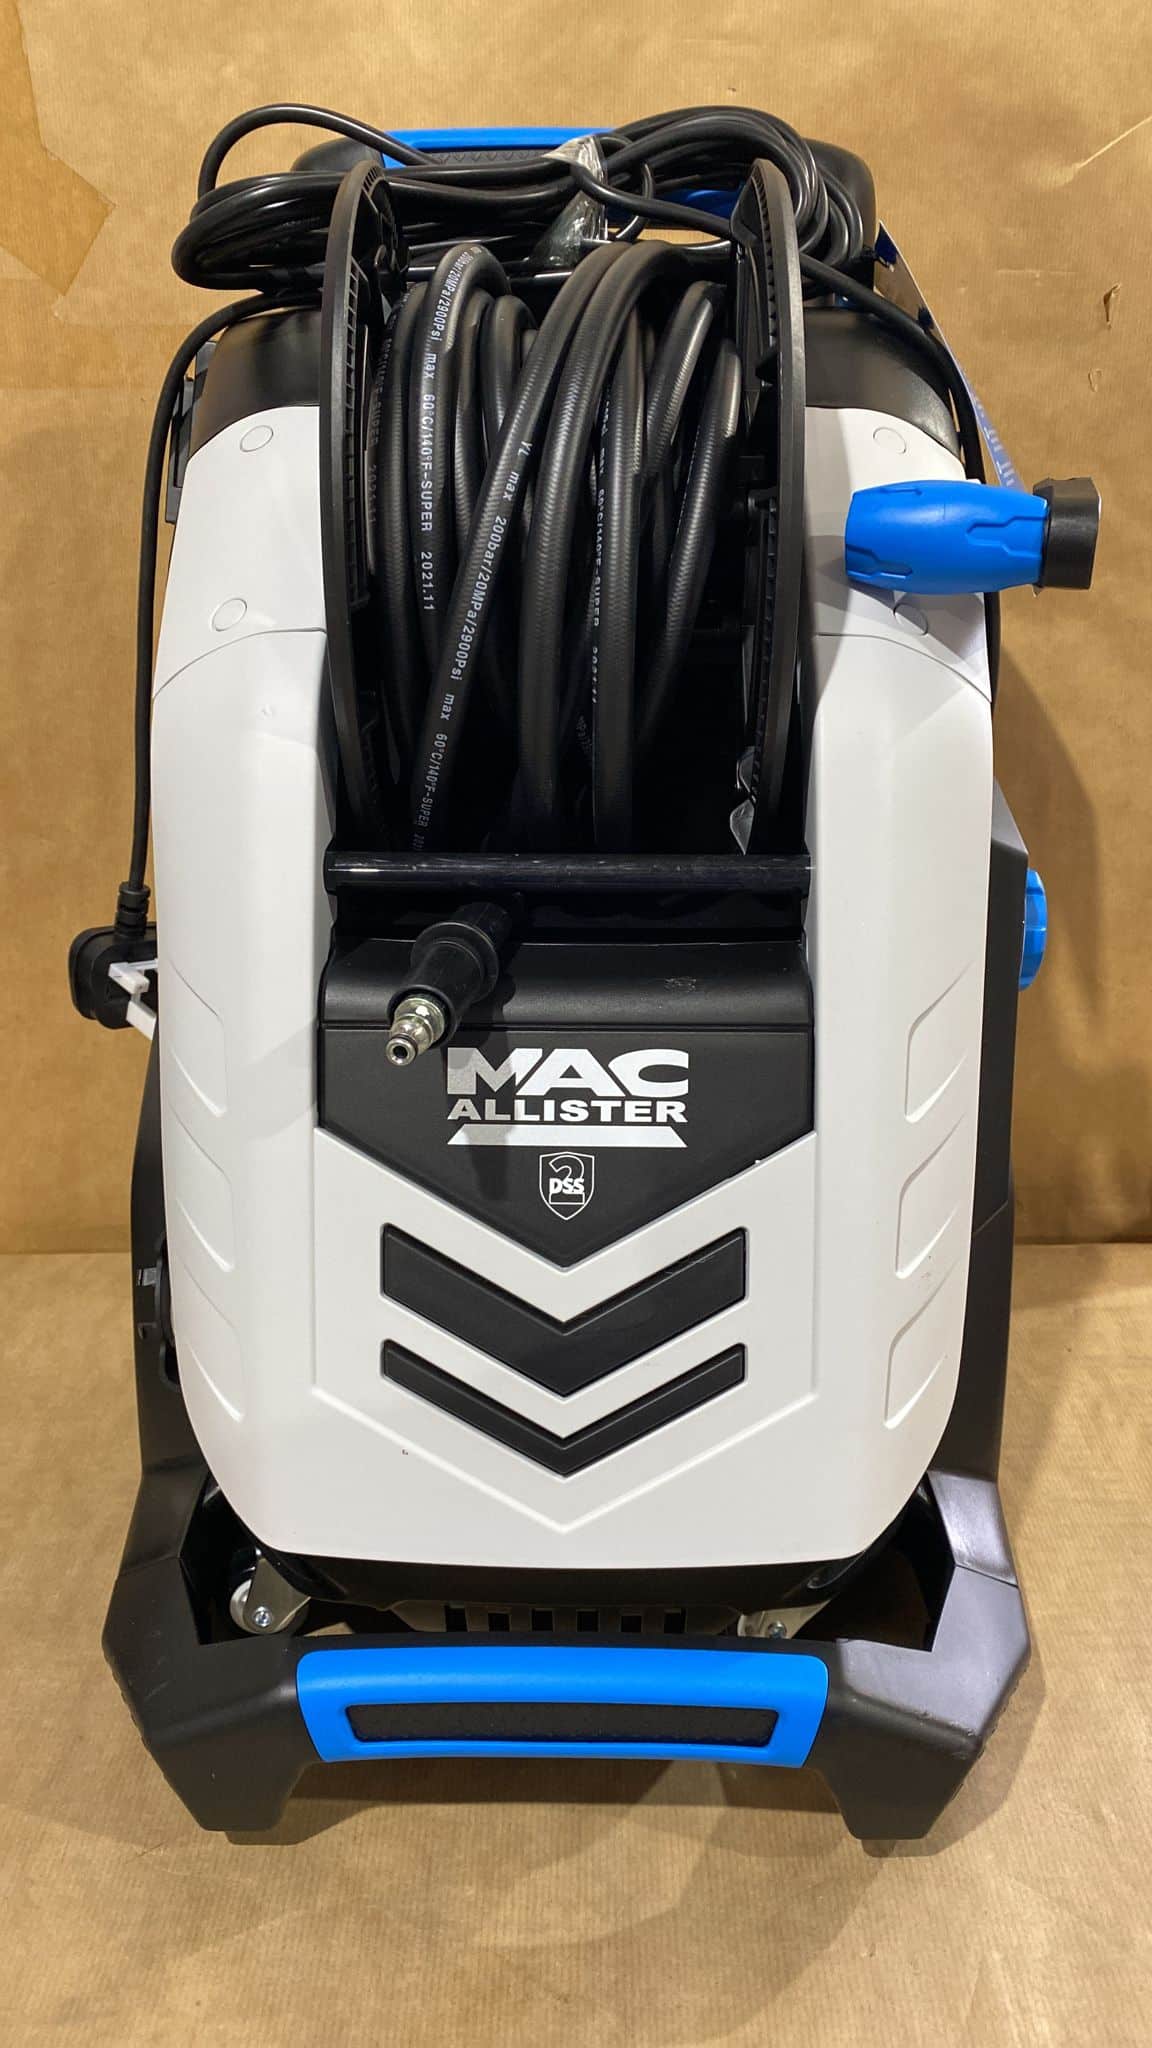 Mac Allister Corded Pressure Washer & Patio Cleaner 2.2kW MPWP2200 - 4065